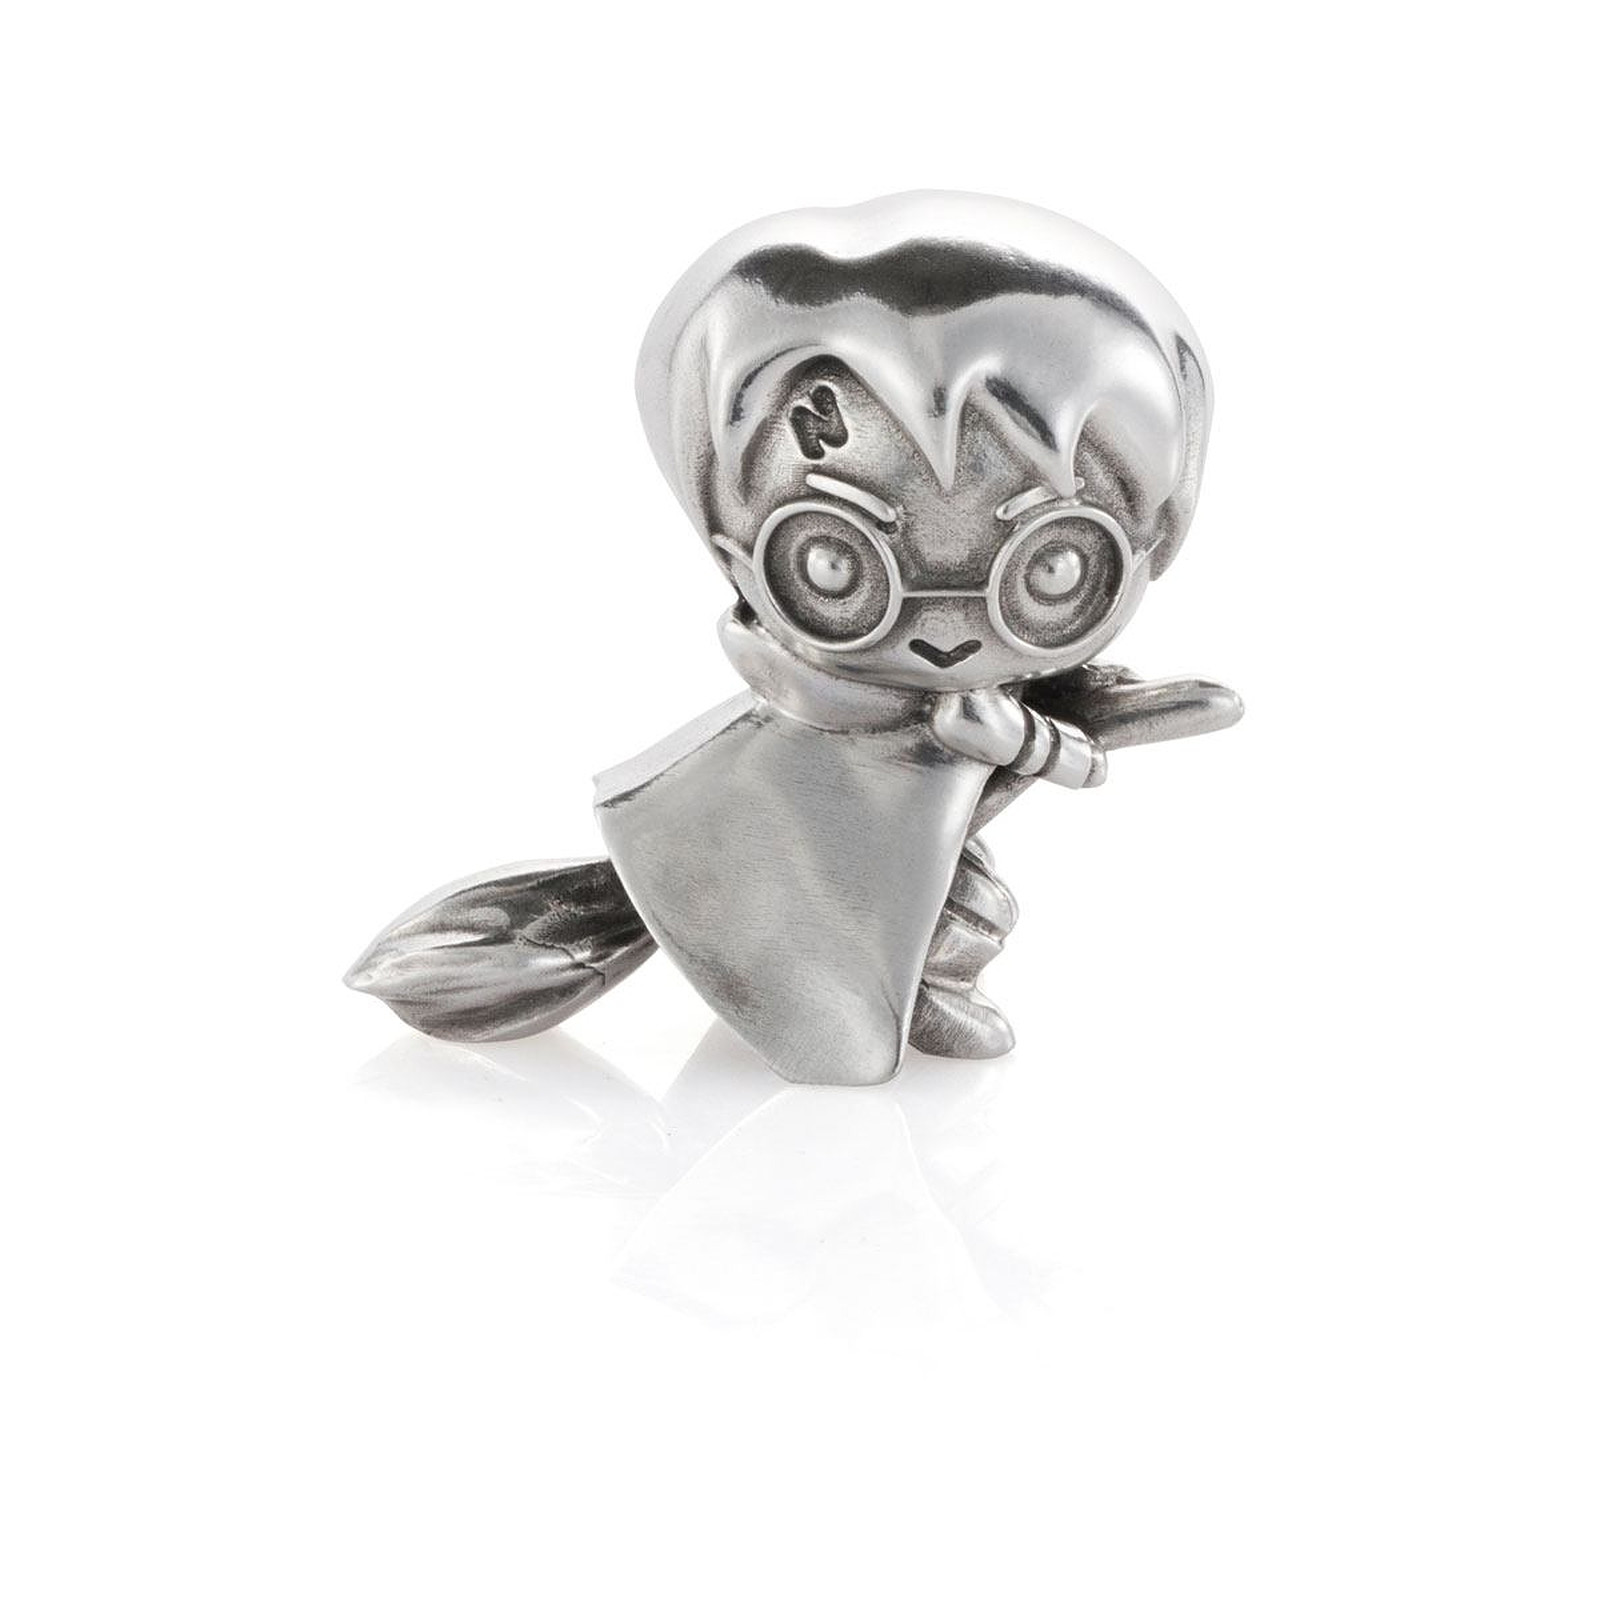 Harry Potter - Statuette Mini Pewter Collectible Harry Potter 5 cm - Figurines Royal Selangor